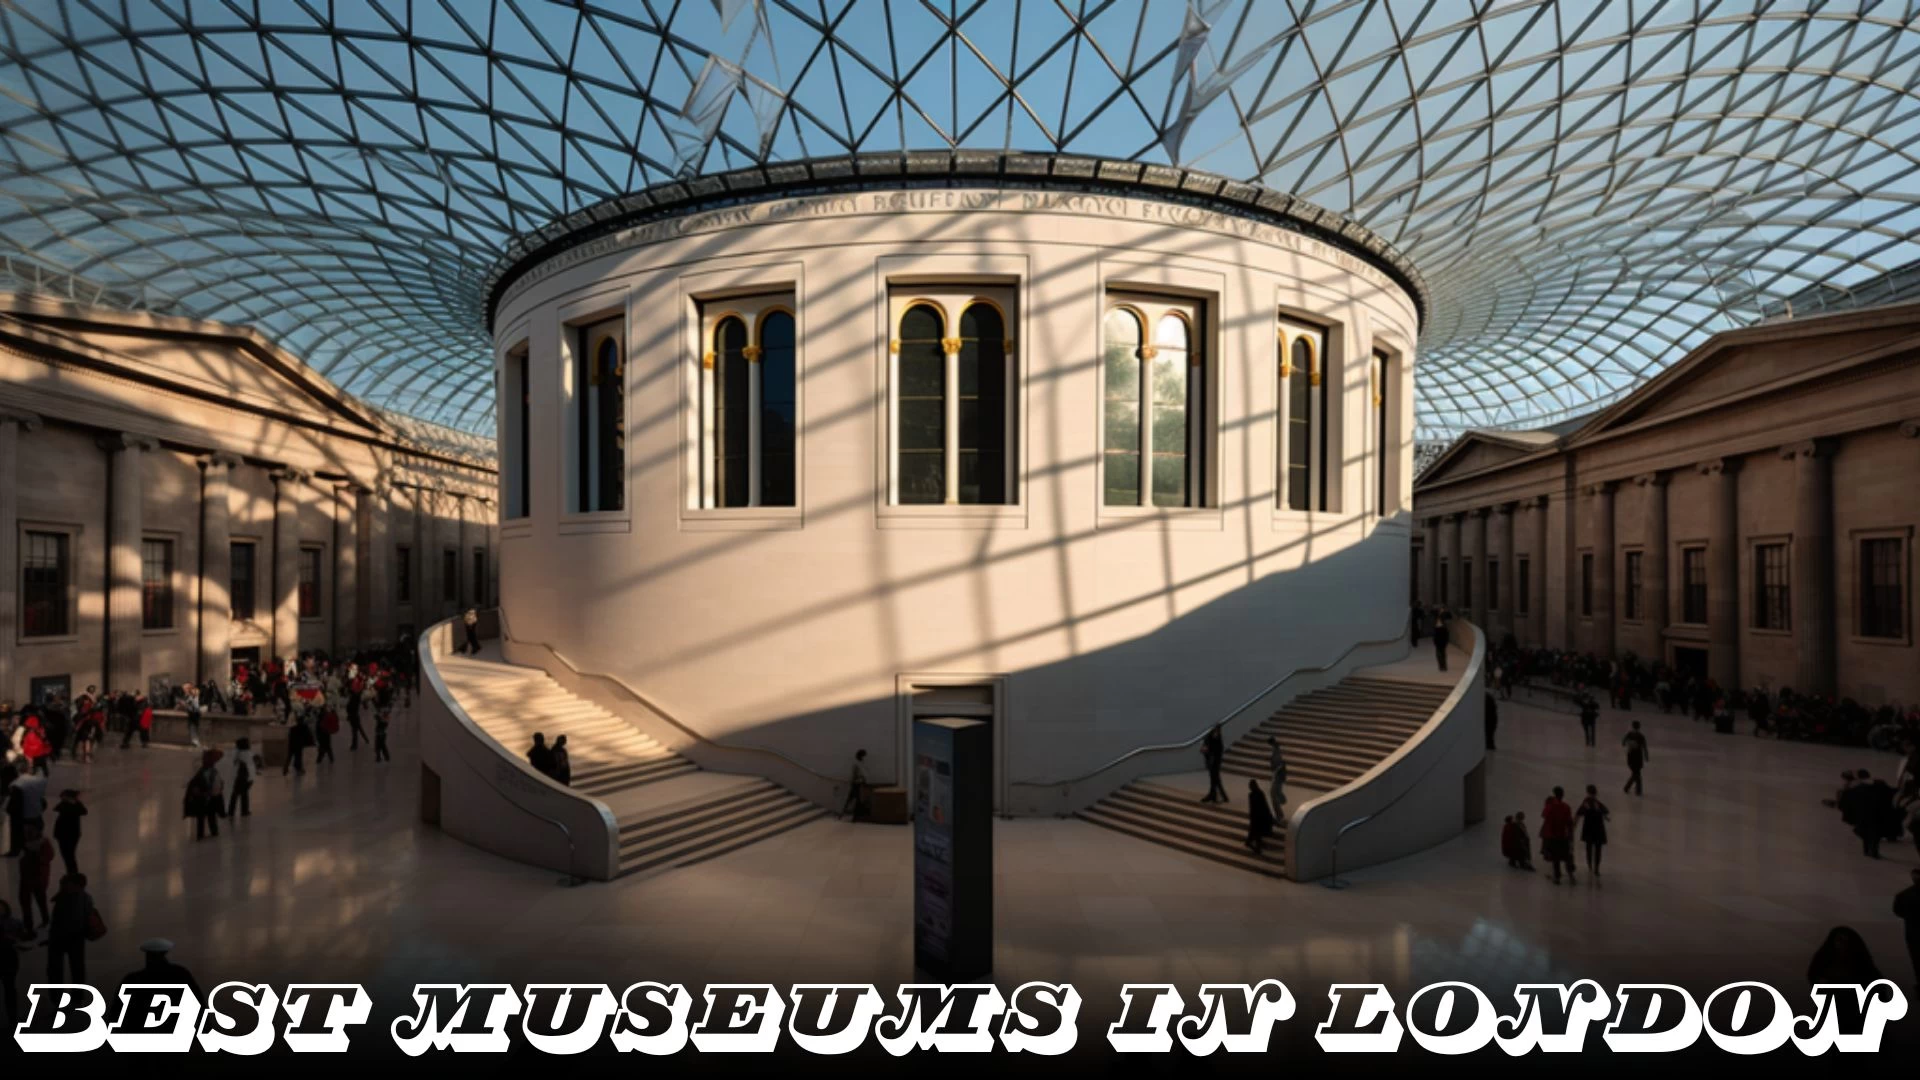 Best Museums in London - Top 10 Artistic Heritage